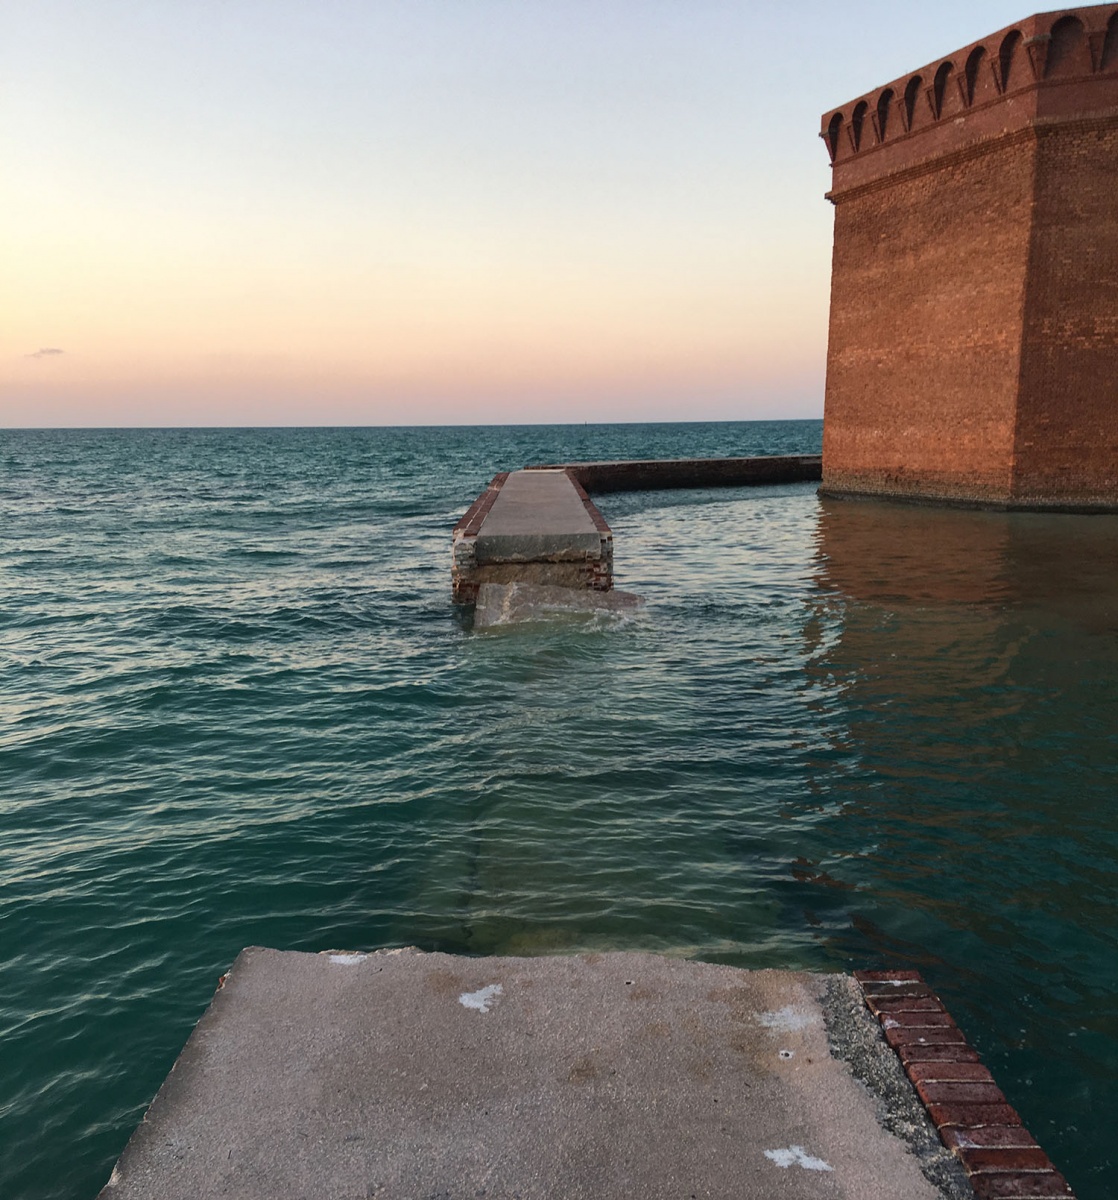 A concrete and brick walkway shows a large gap where a part of it collapsed into shallow blue water.